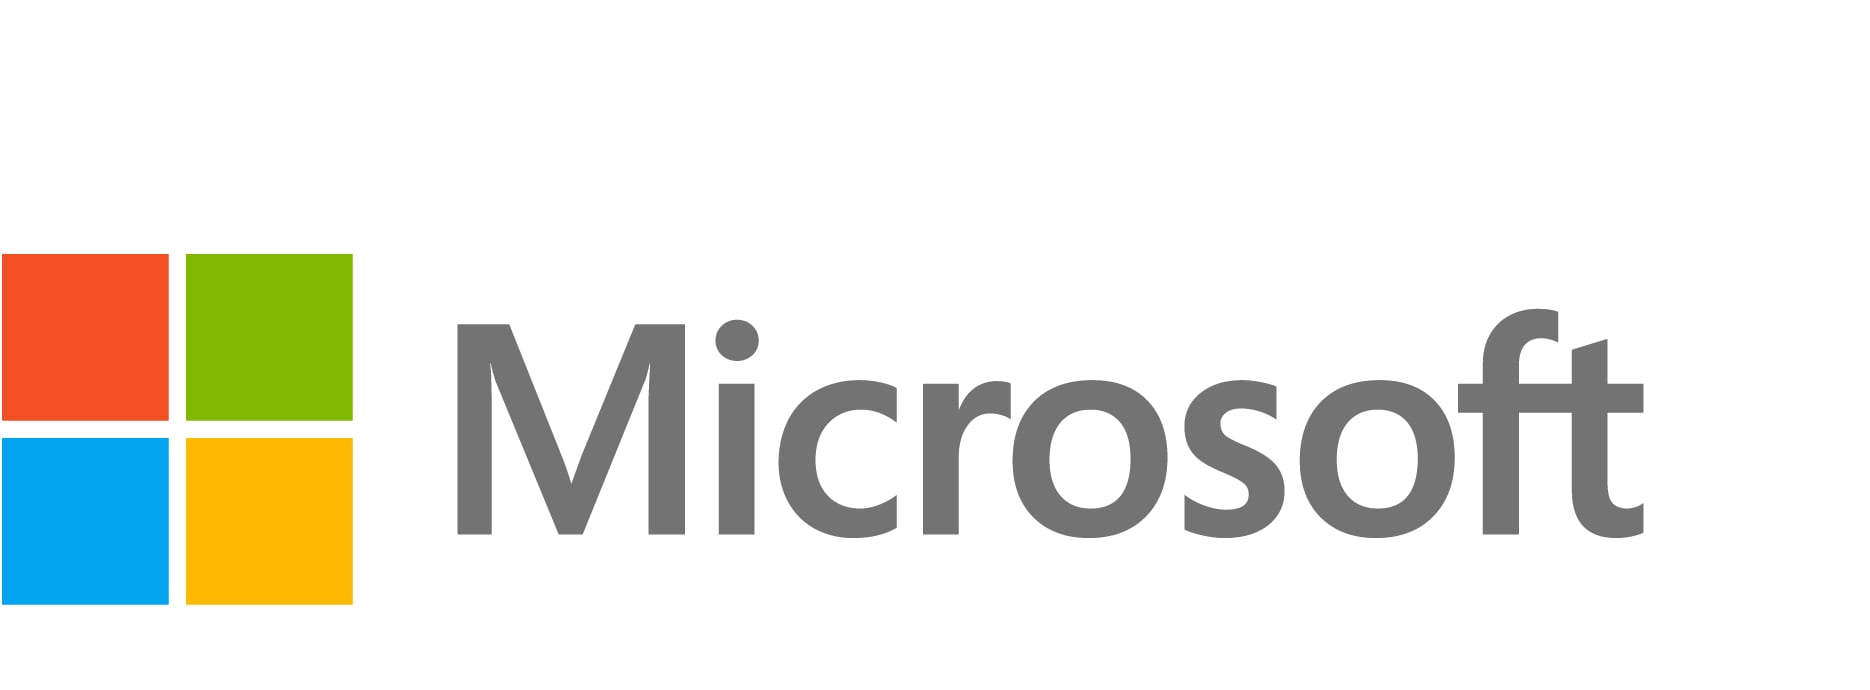 Microsoft Social Engagement - subscription license (1 month) - 10000 additional posts